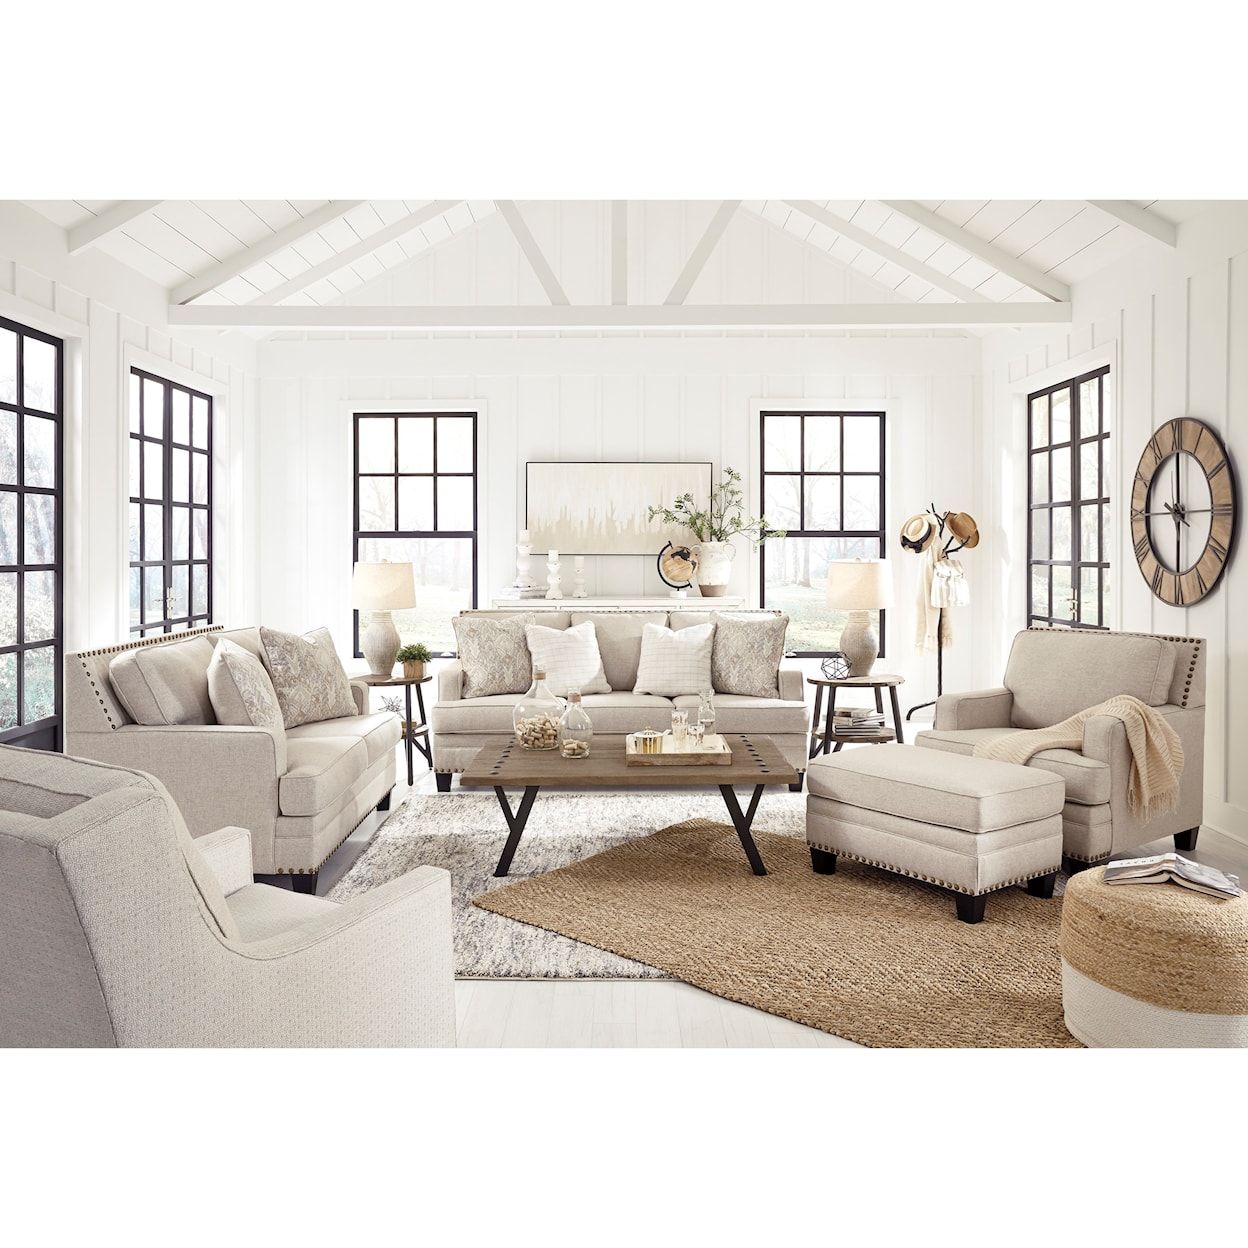 Benchcraft Claredon 4pc living room group